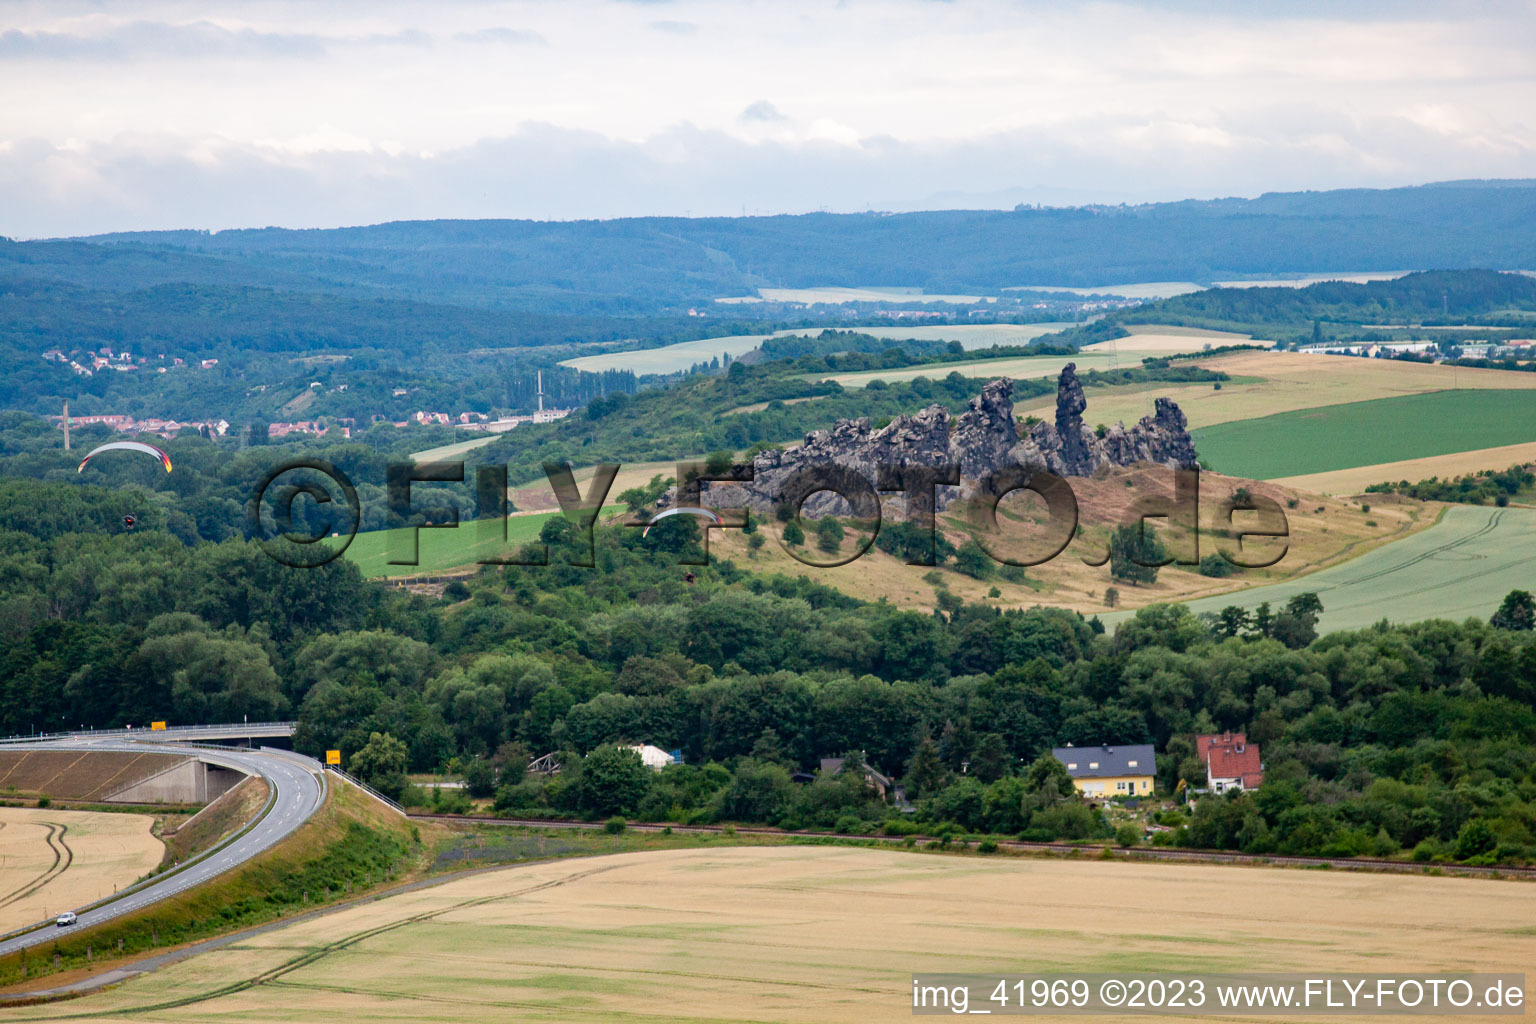 Devil's Wall (Königsstein) in the district Weddersleben in Thale in the state Saxony-Anhalt, Germany from the plane